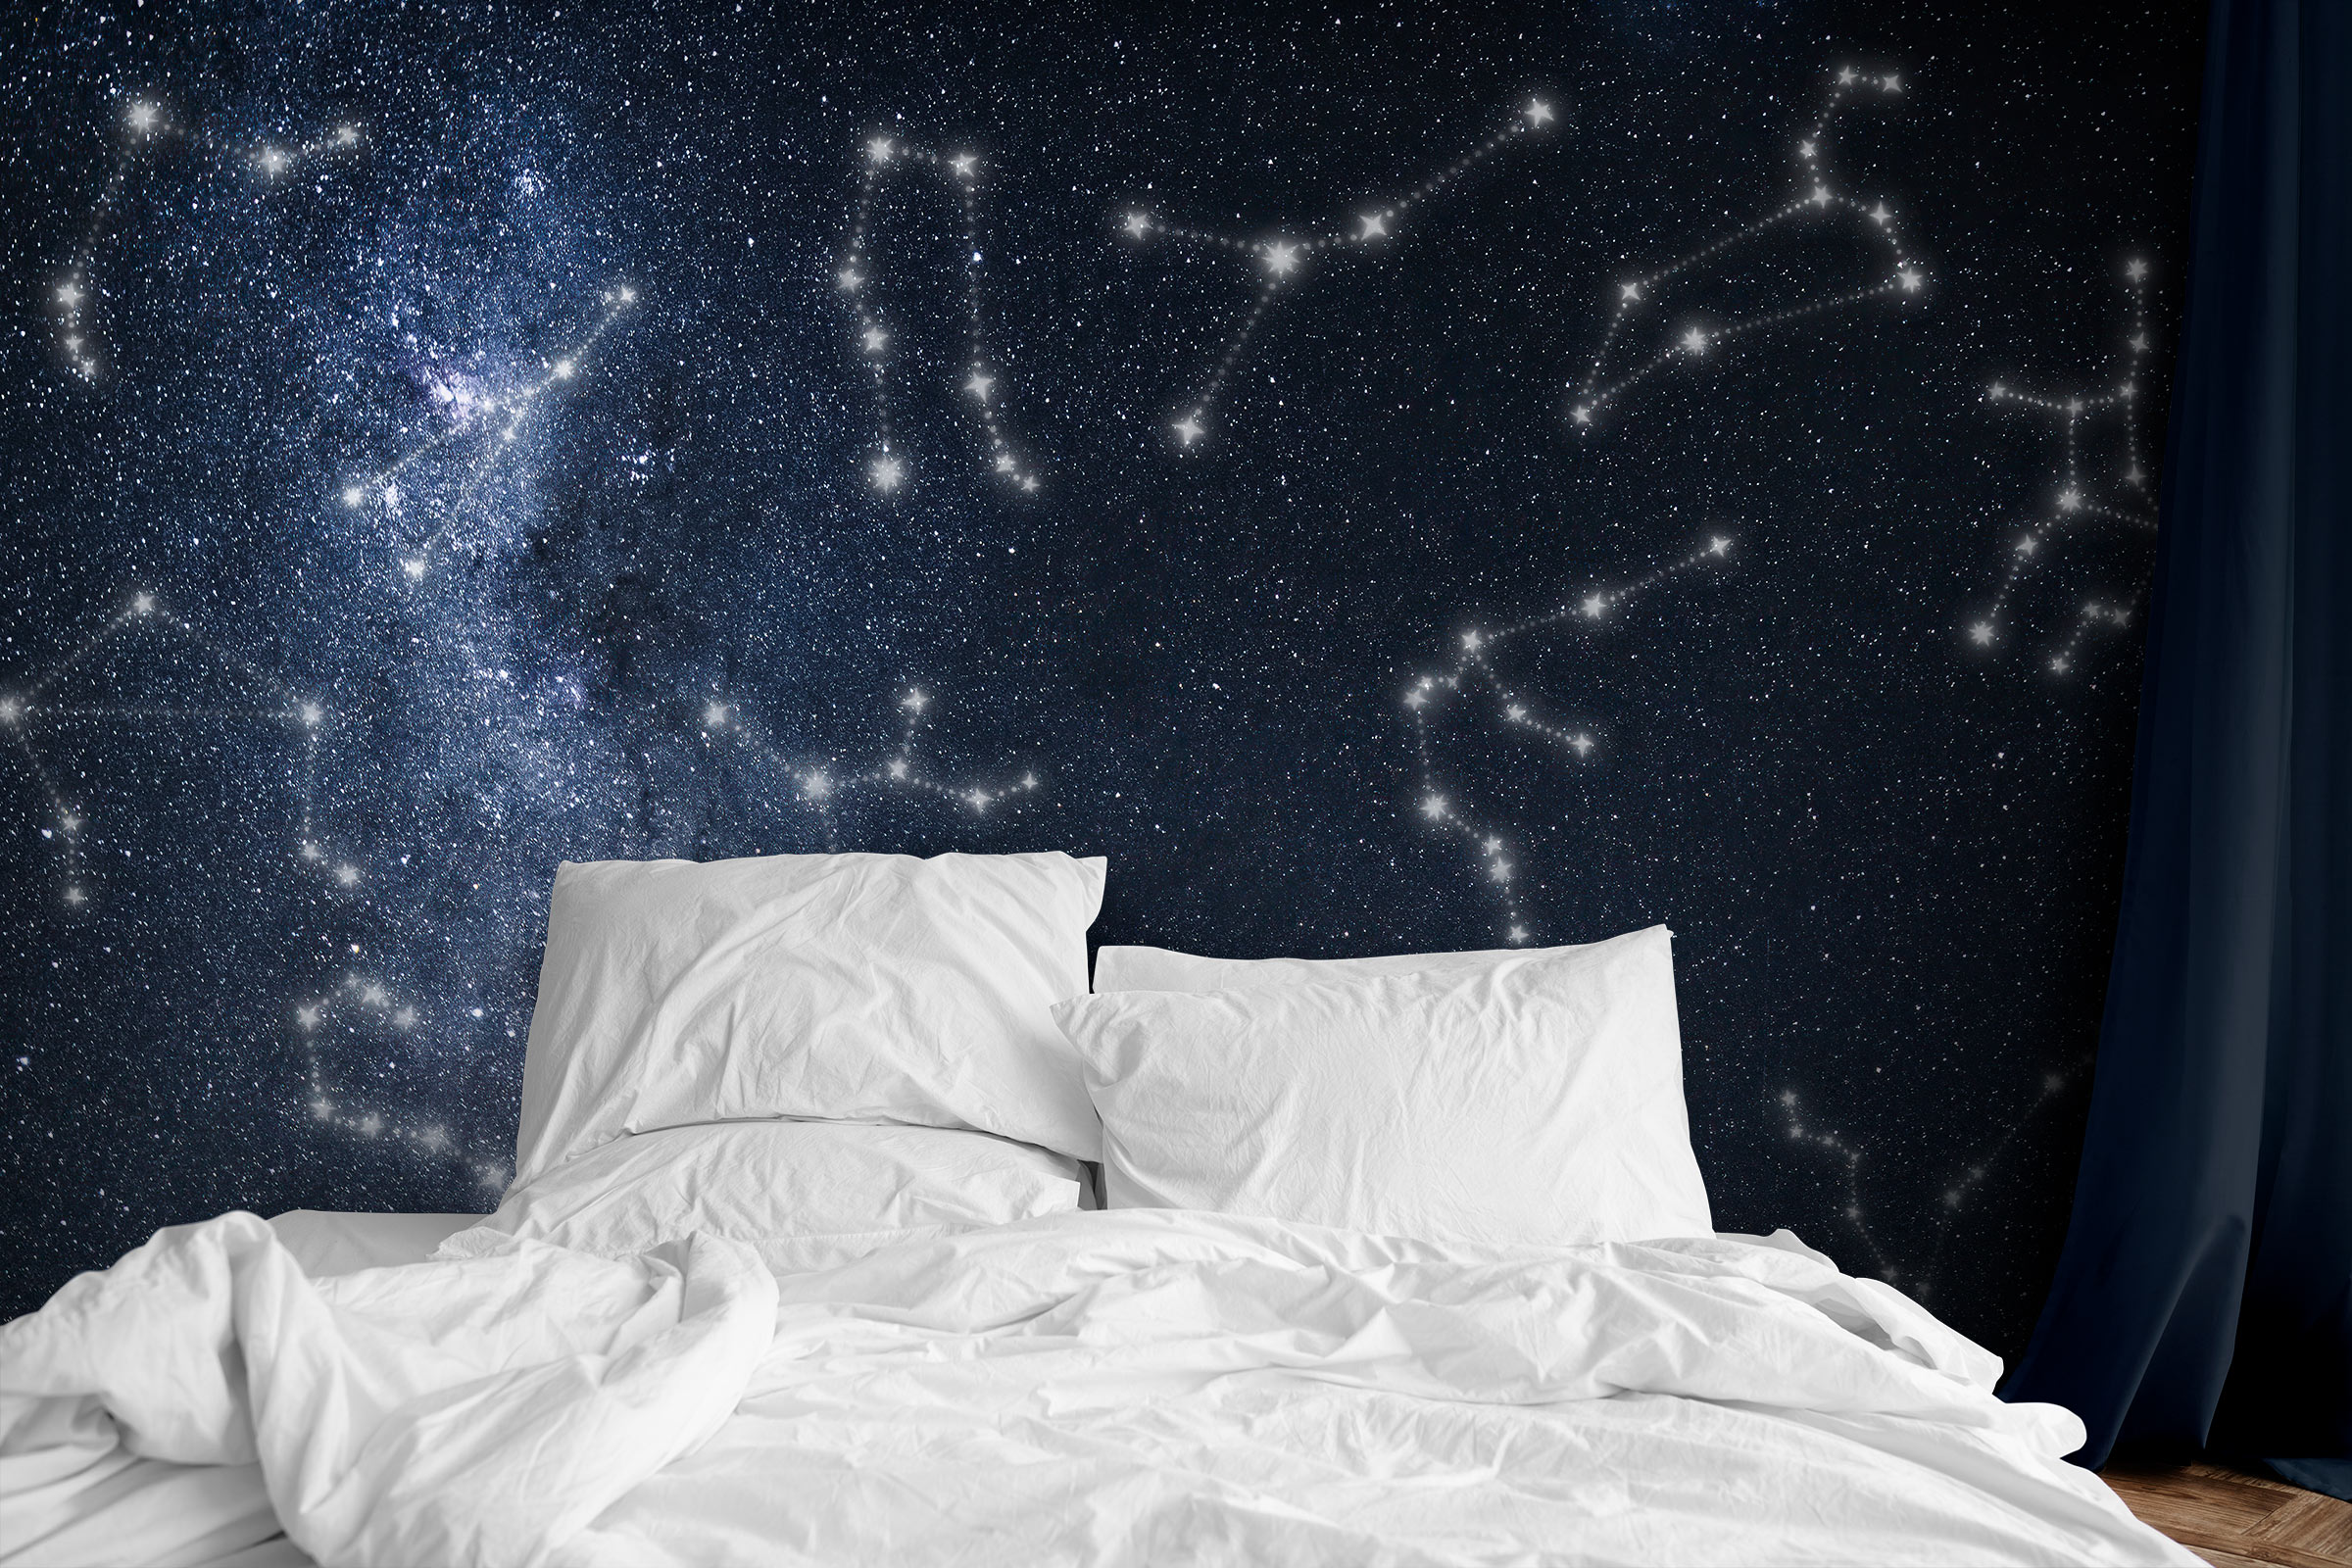 Zodiac Signs in the Starry Sky